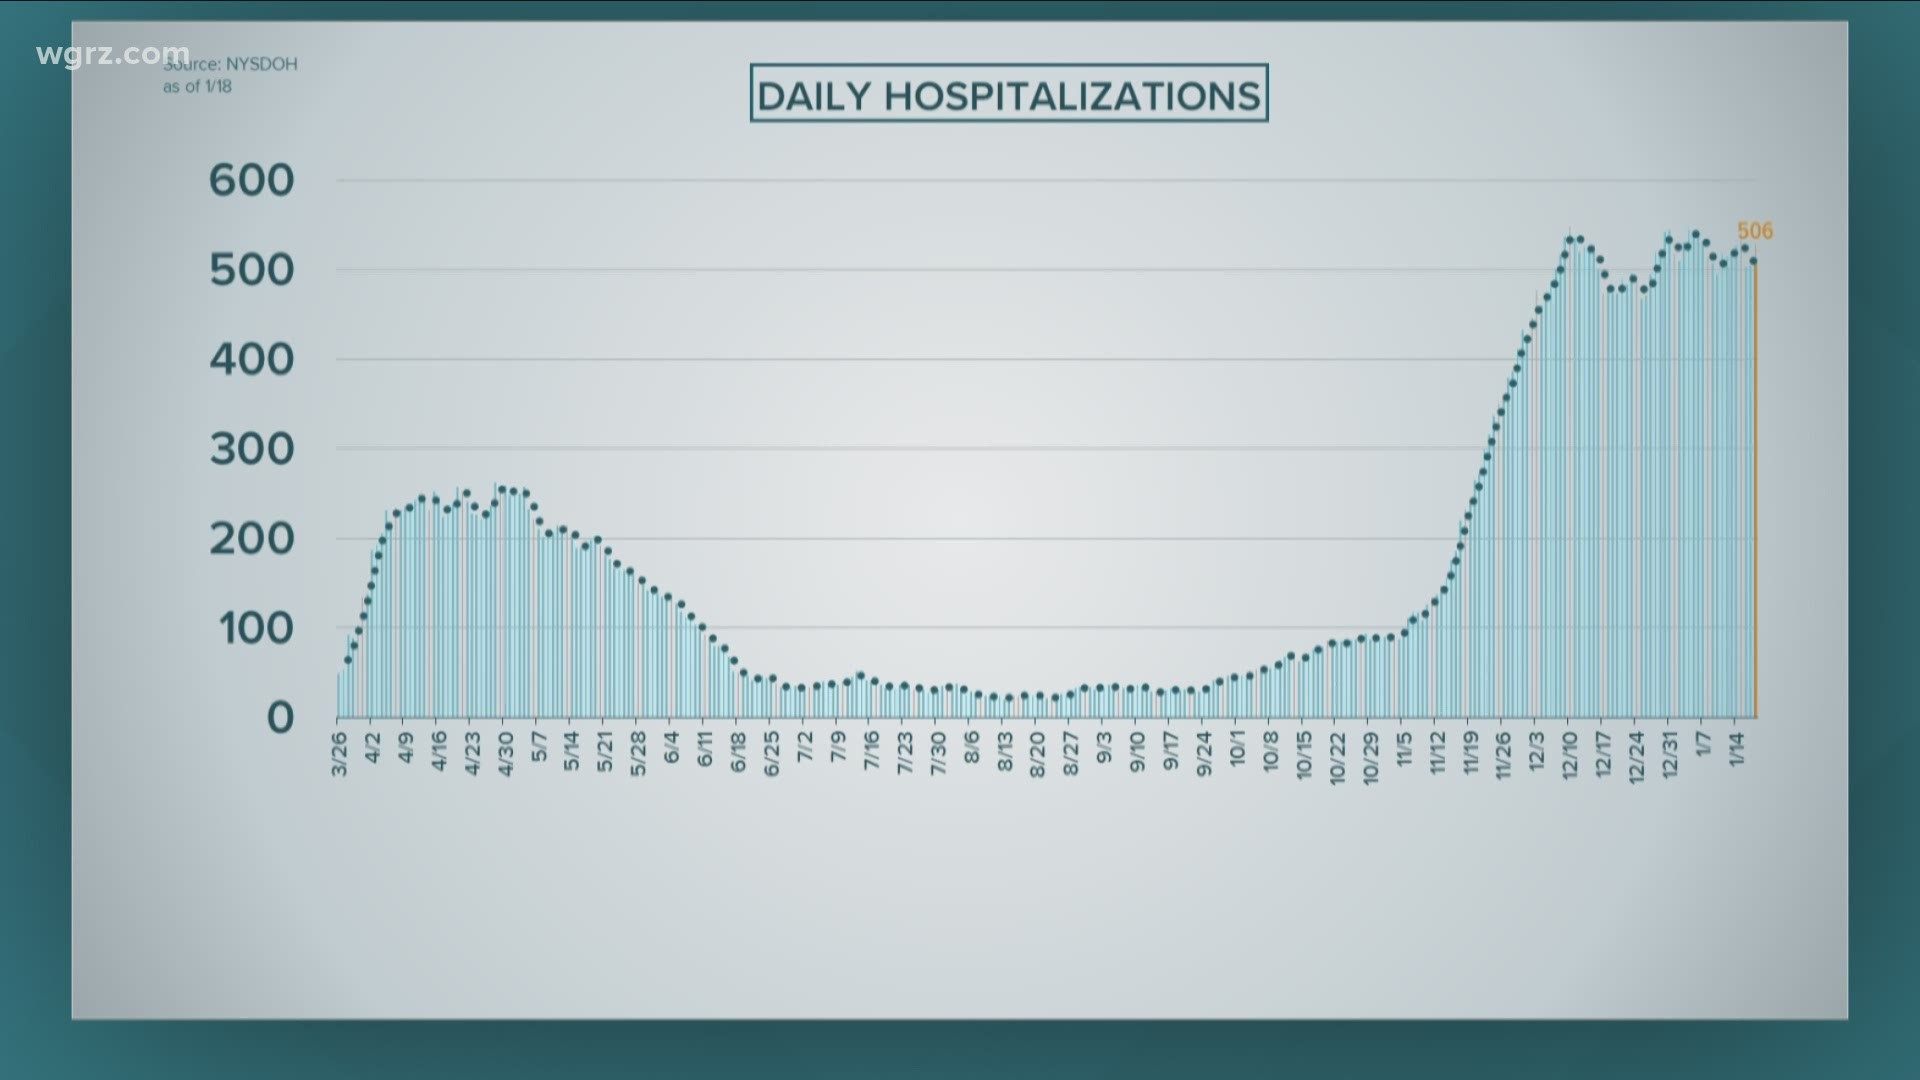 Hospitalizations in Western New York held fairly steady over the past 48 hours. As of Monday, there were 506 people in the hospital with COVID-19.